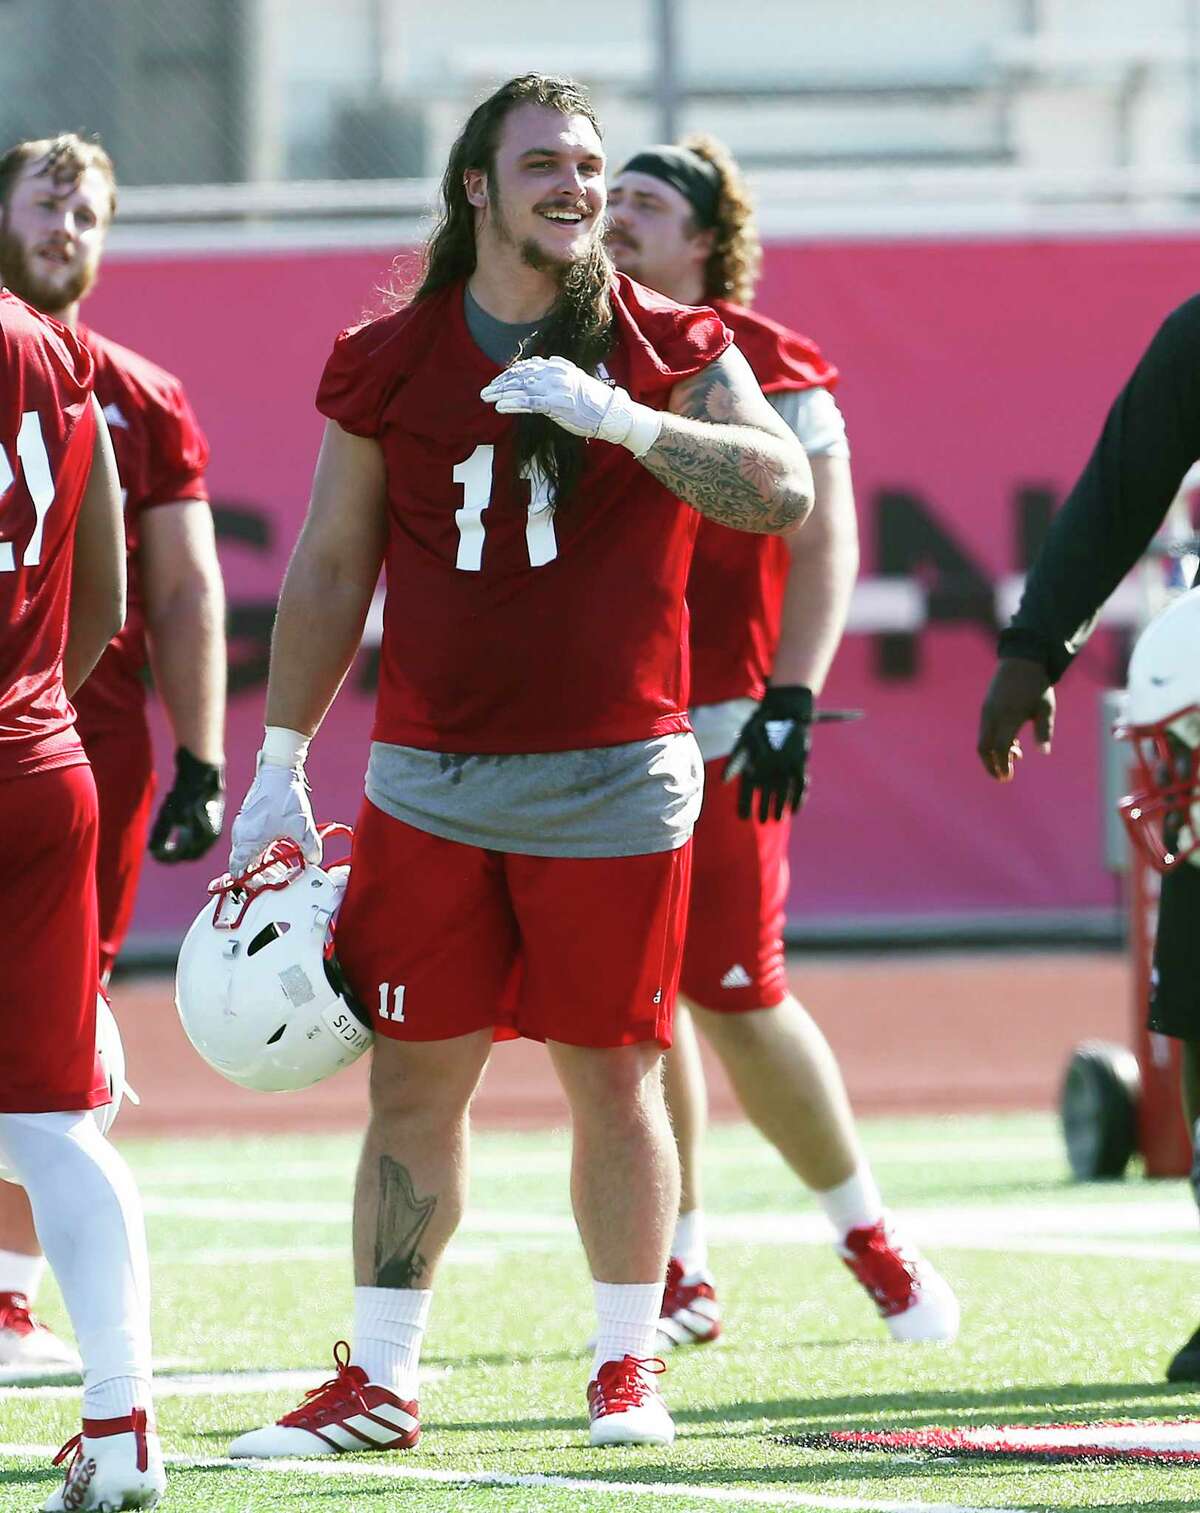 Lukas Termin enjoys company on the field as the Incarnate Word football team holds its first practice of the season at Benson Stadium on August 2, 2019.